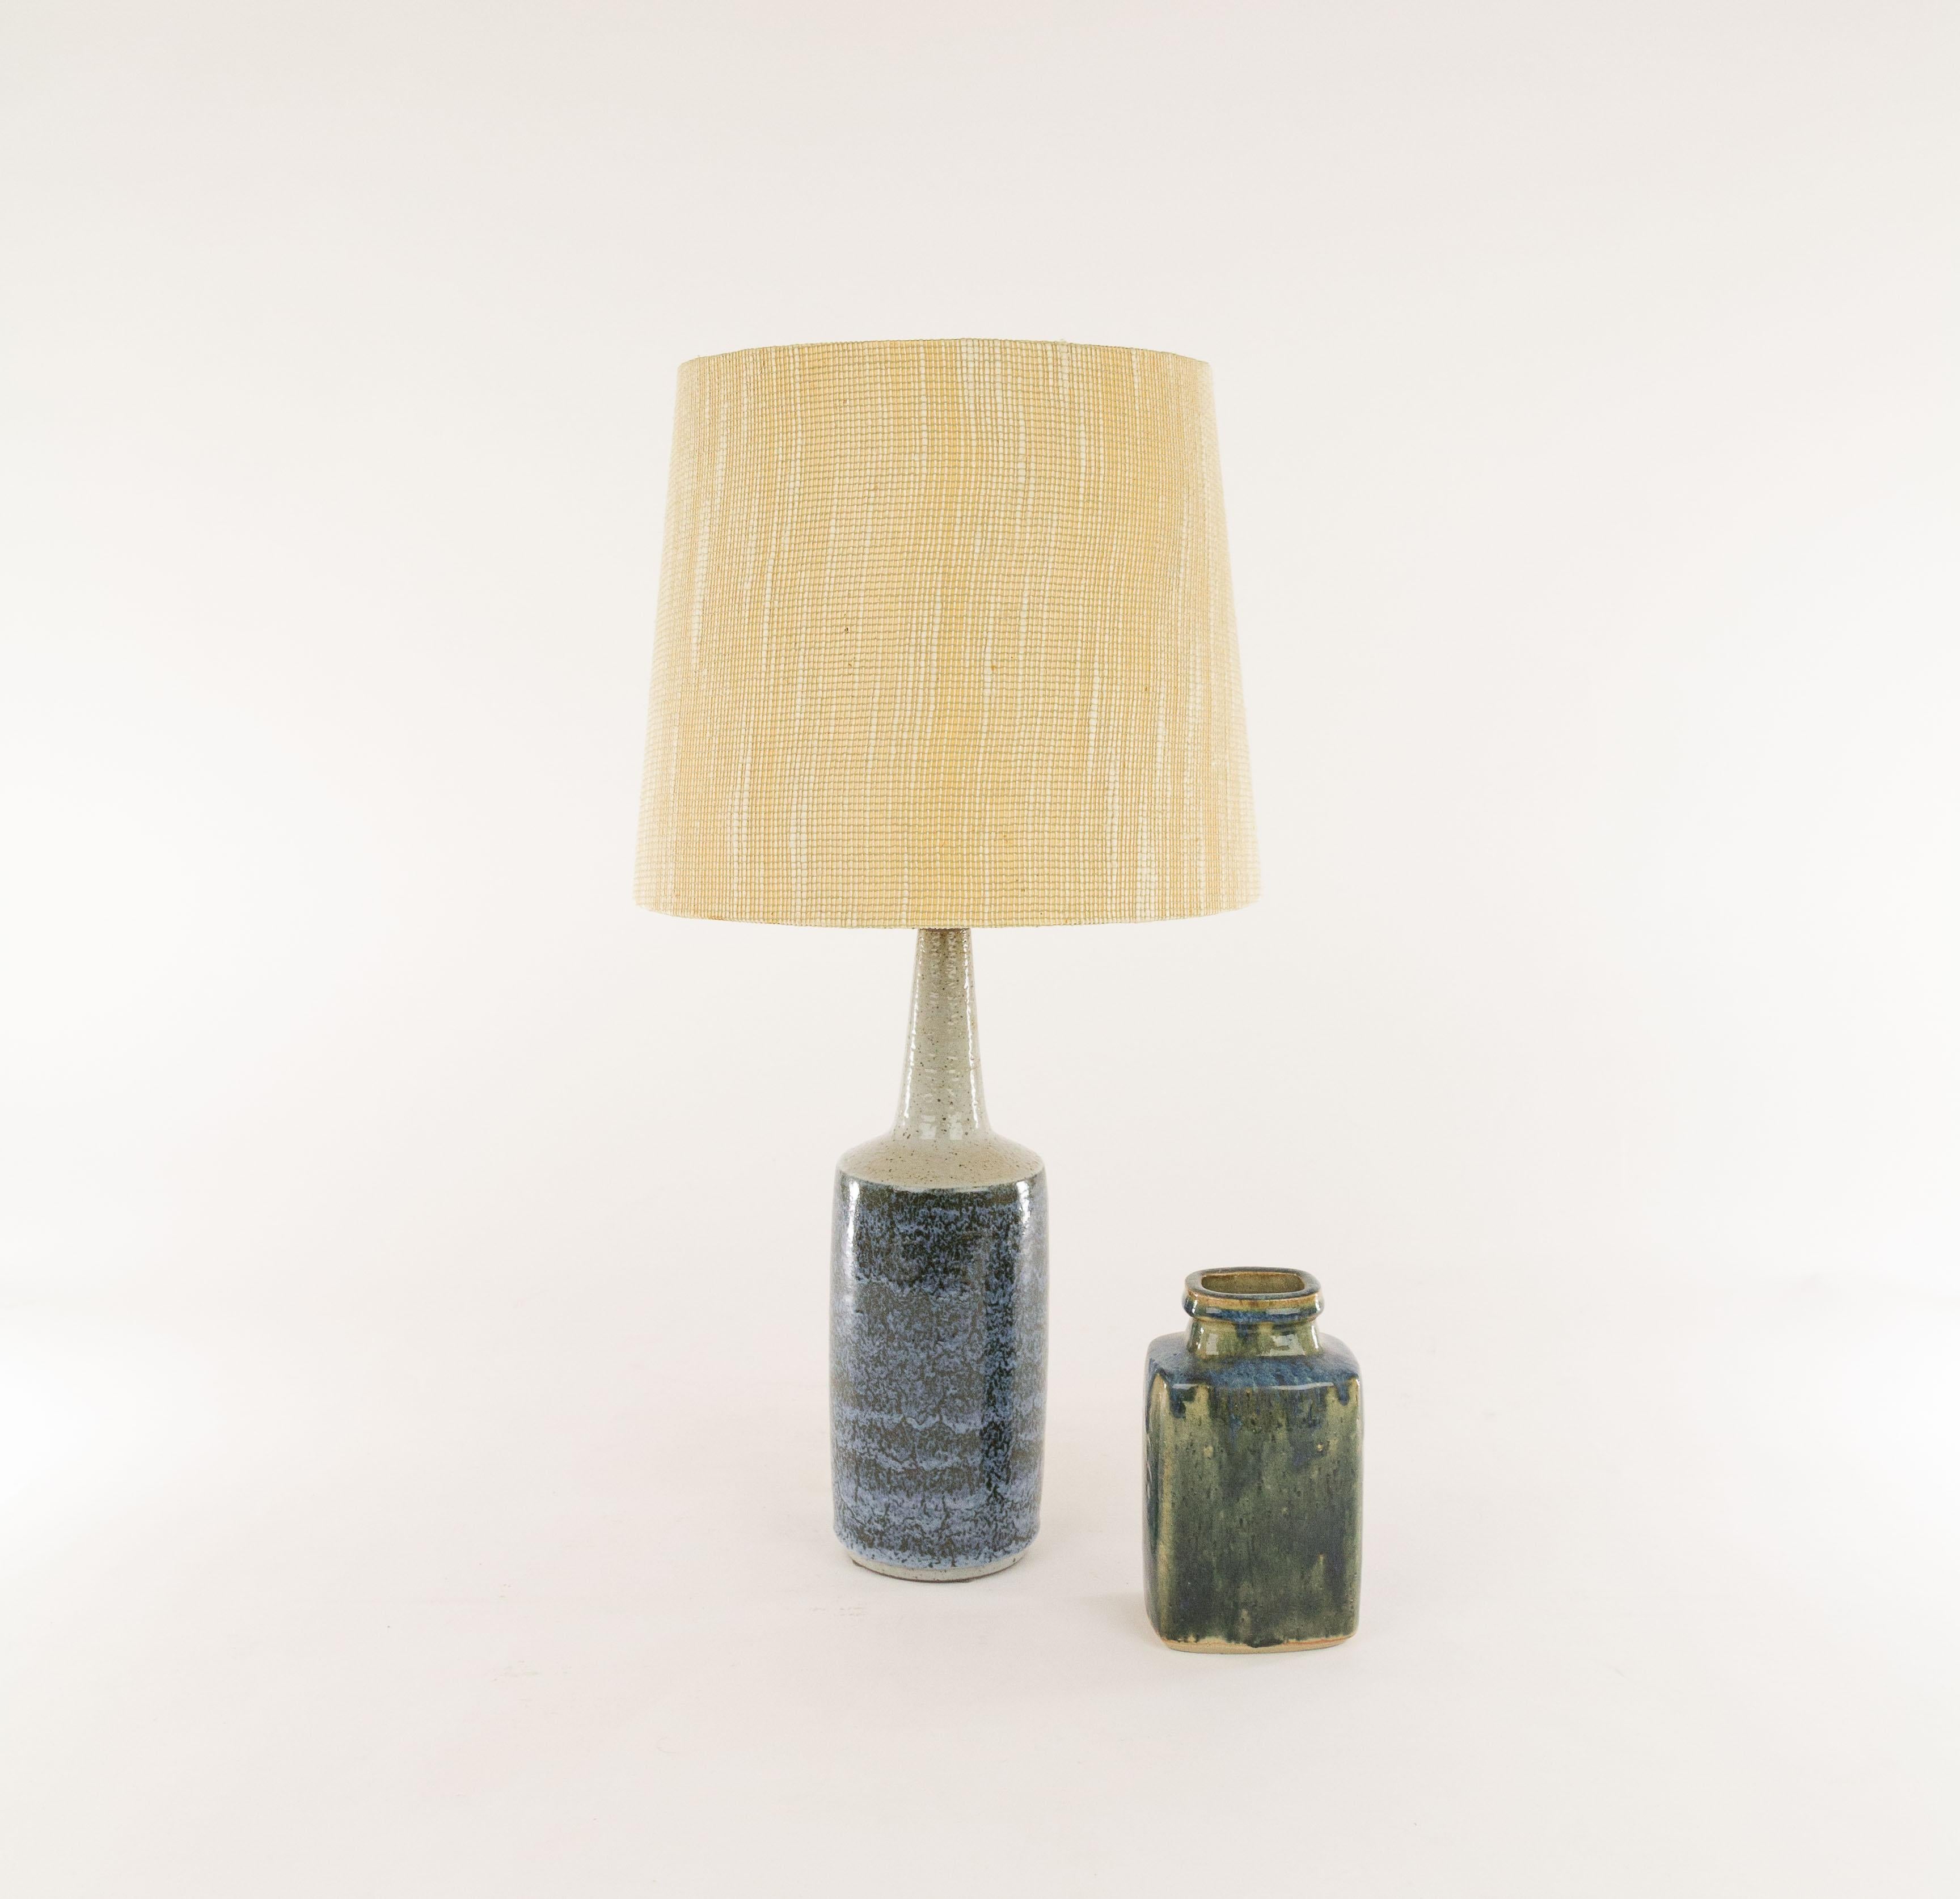 Danish chamotte (texture clay) table lamp with impressed decoration by Annelise and Per Linnemann-Schmidt for Palshus, Denmark, 1960s.

Palshus produced a wide range of table lamps, in different patterns, height and colors (various shades of